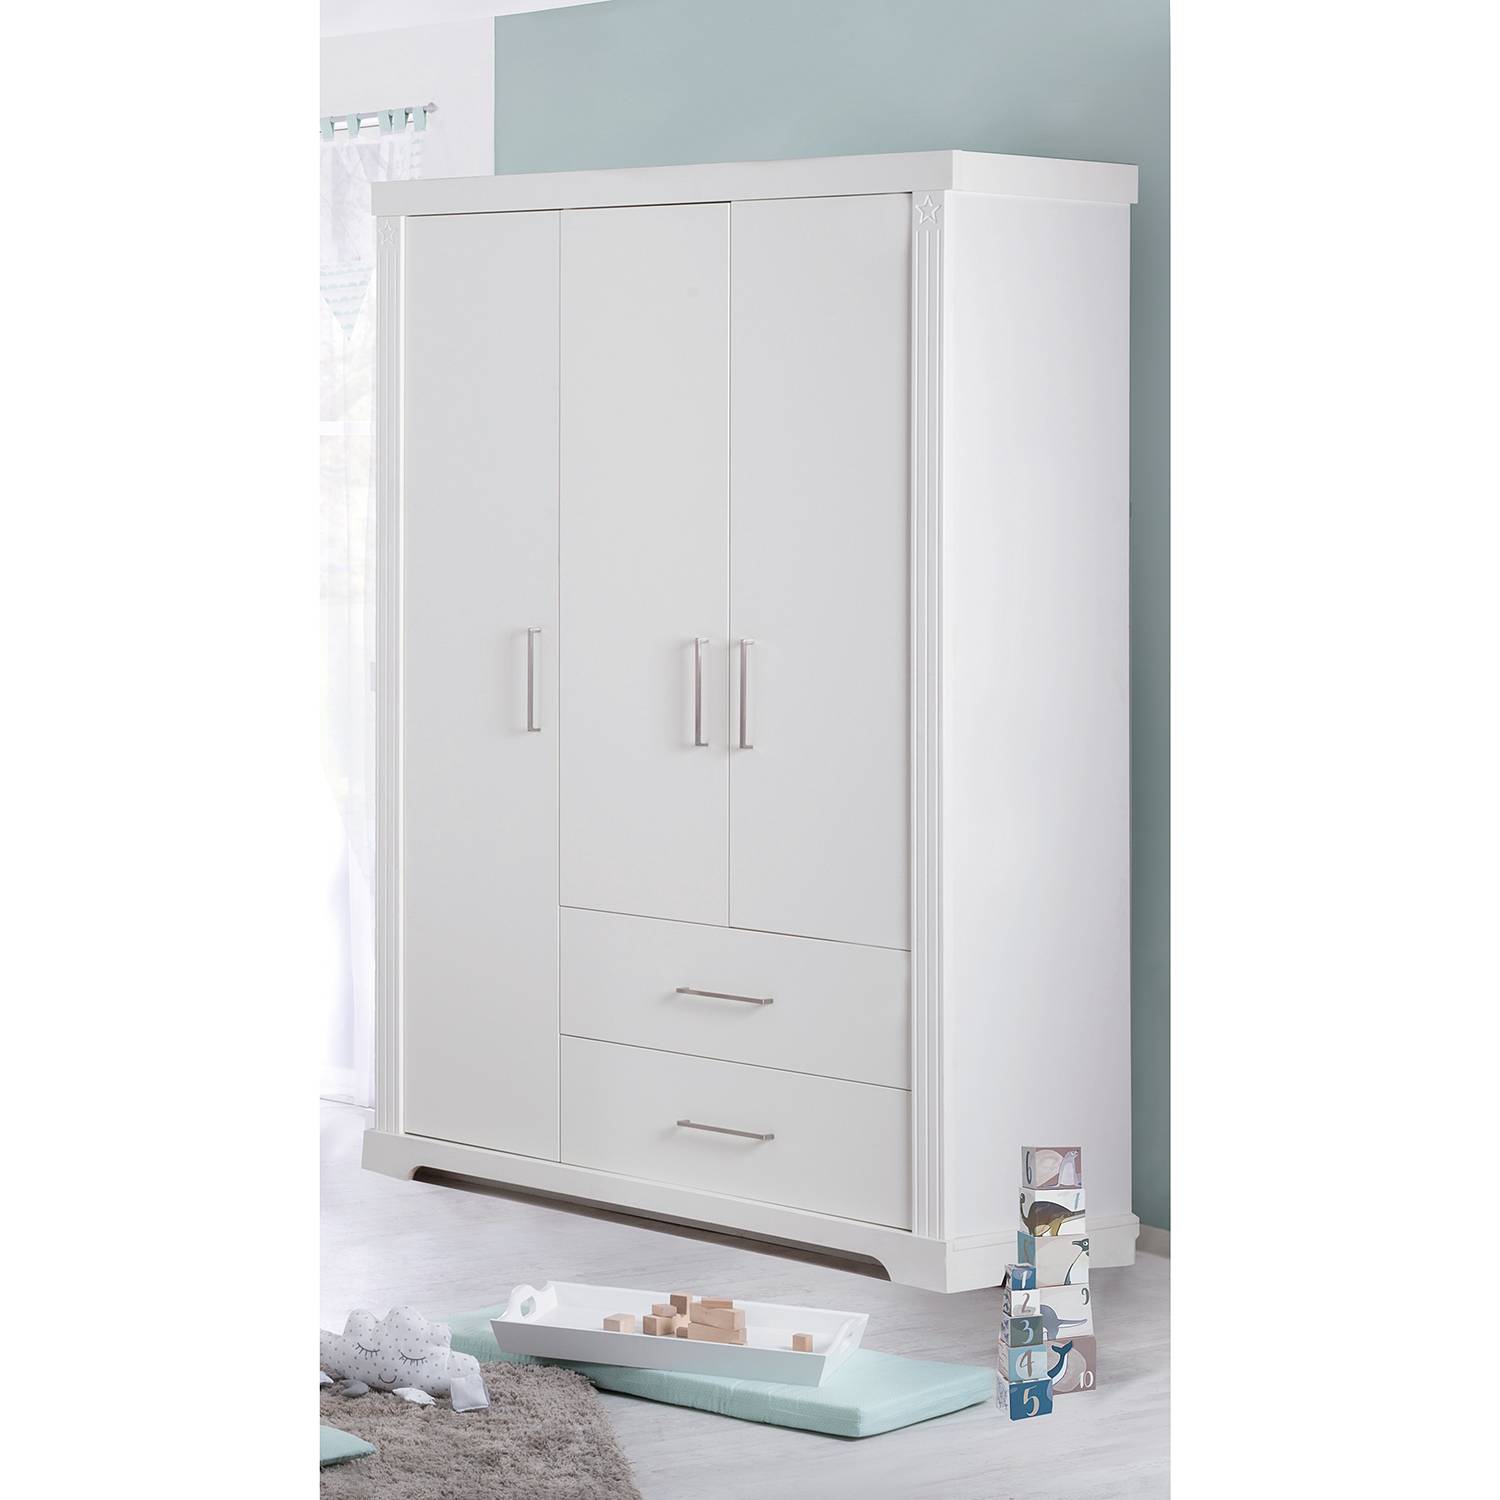 Image of Armoire Maxi 000000001000173679